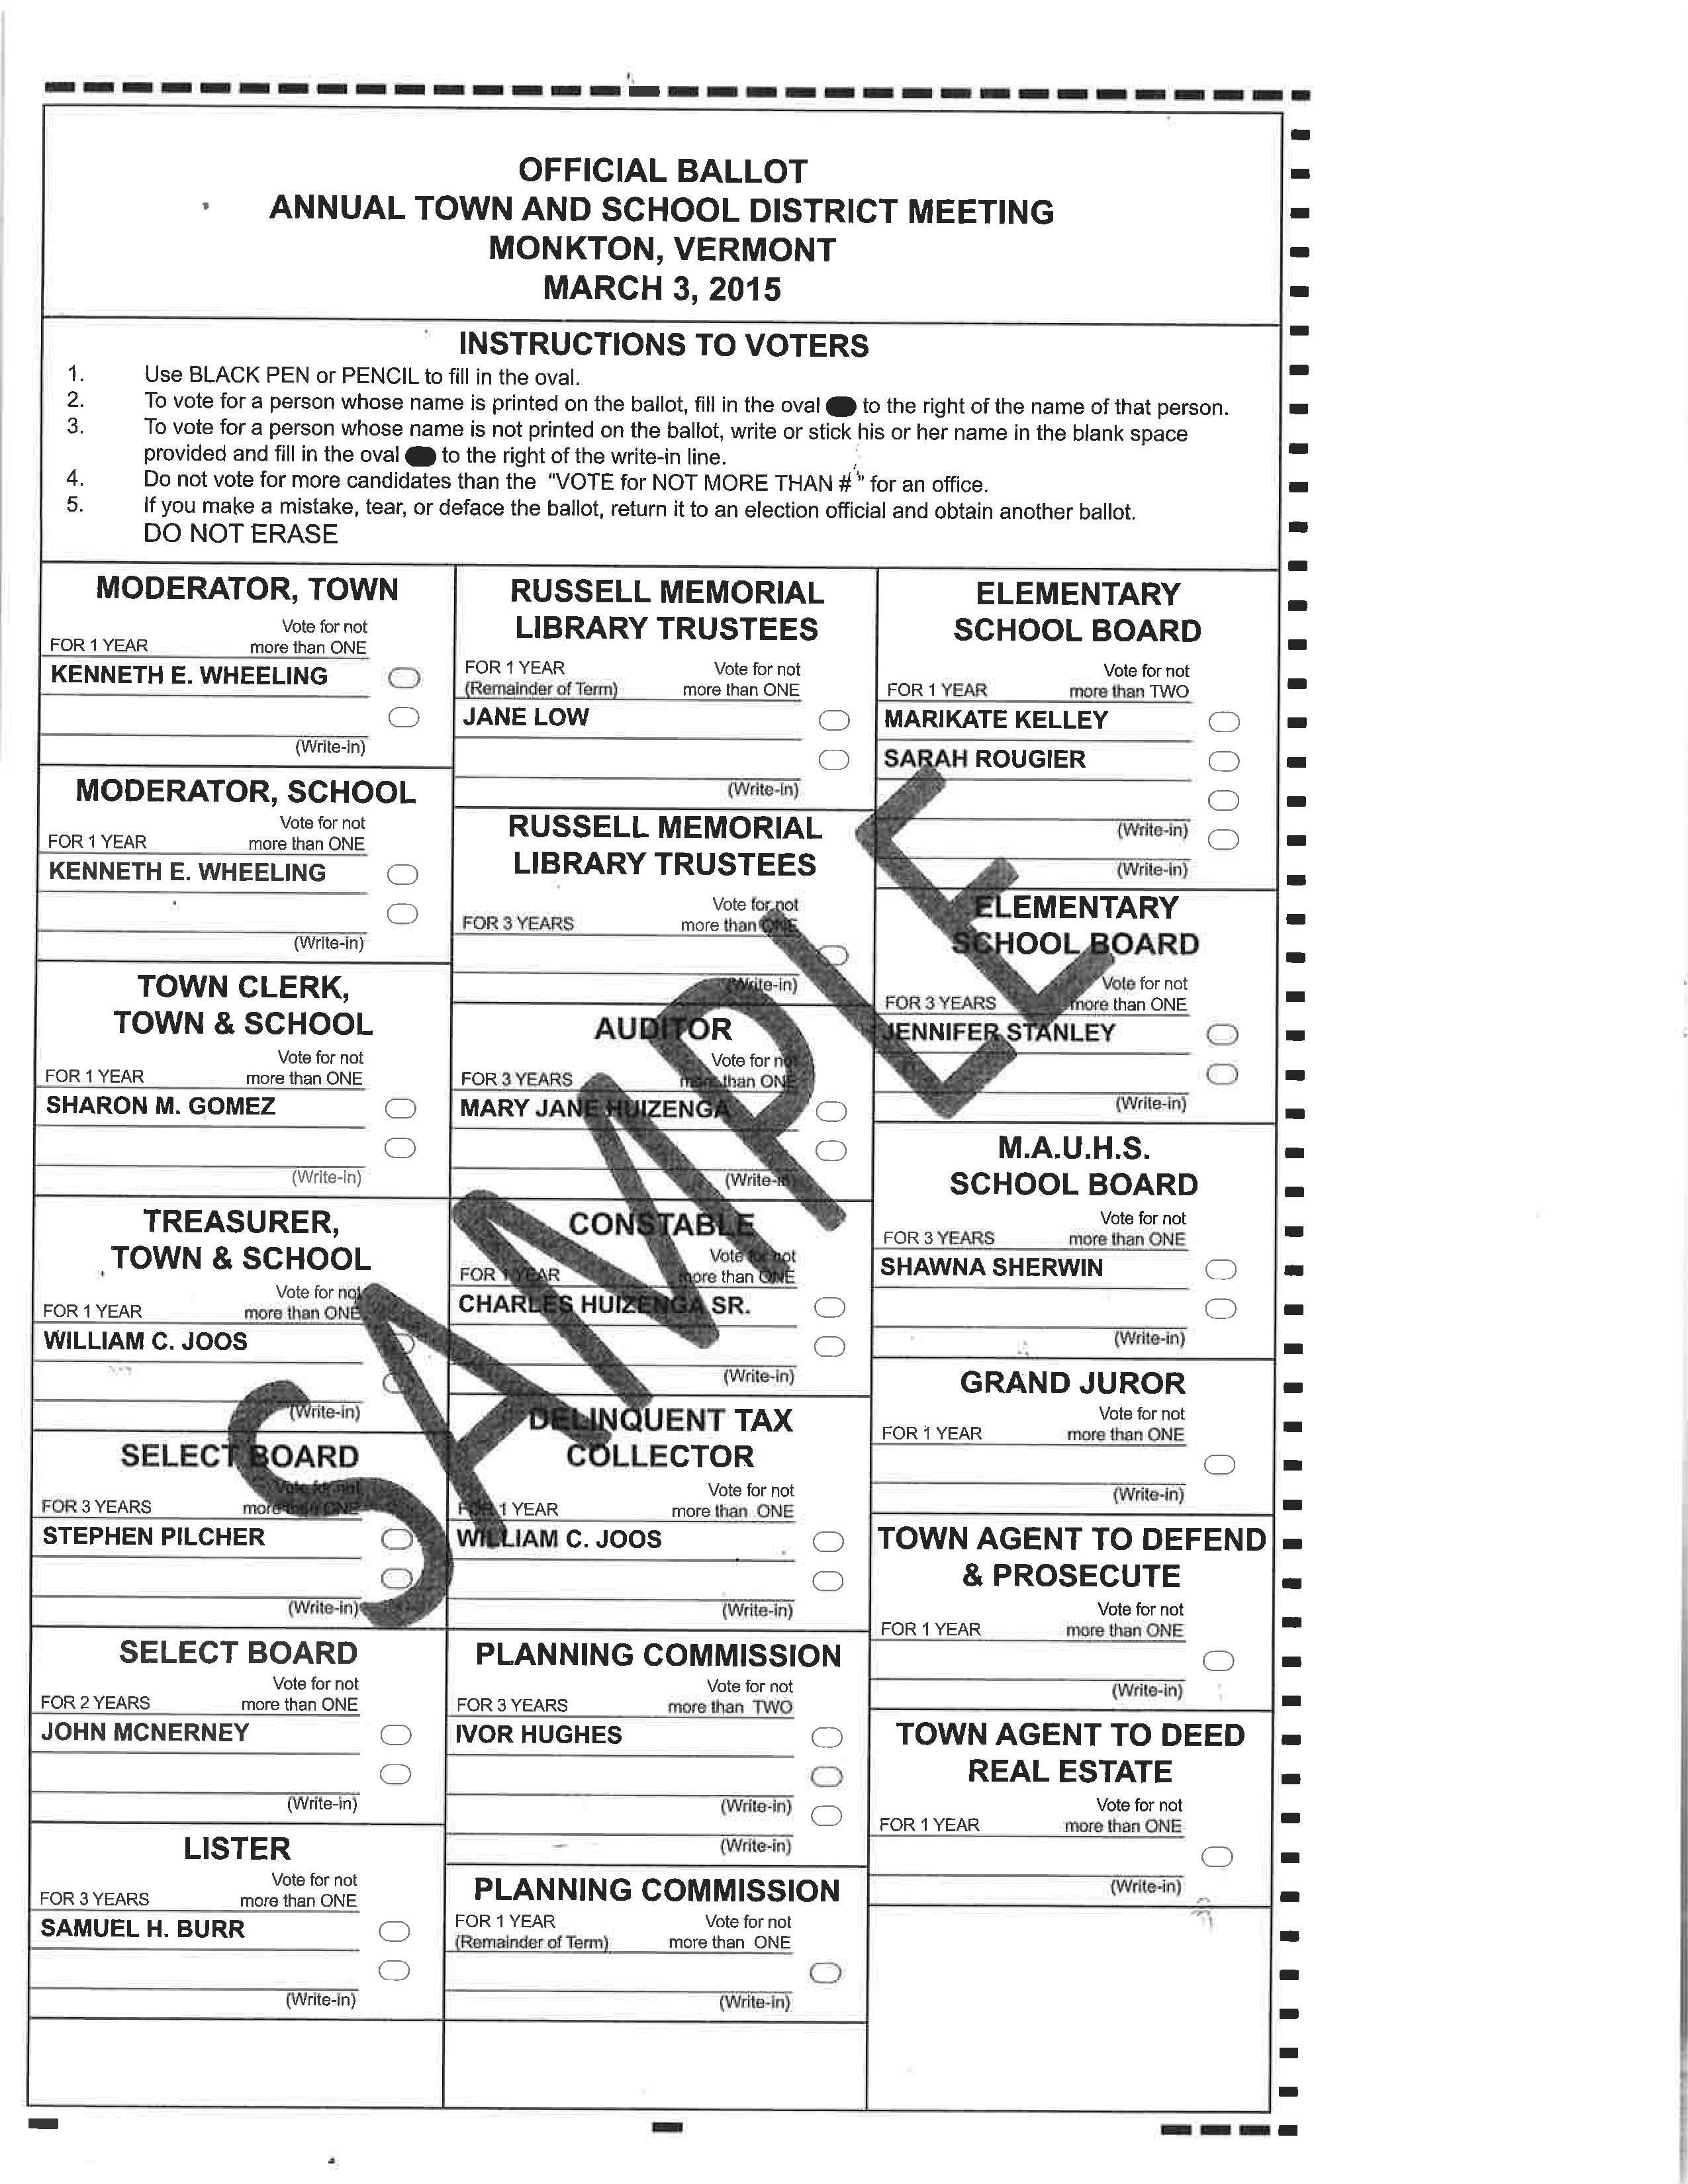 Sample Ballots for Town Meeting Day March 3, 2015 | Monkton Vermont